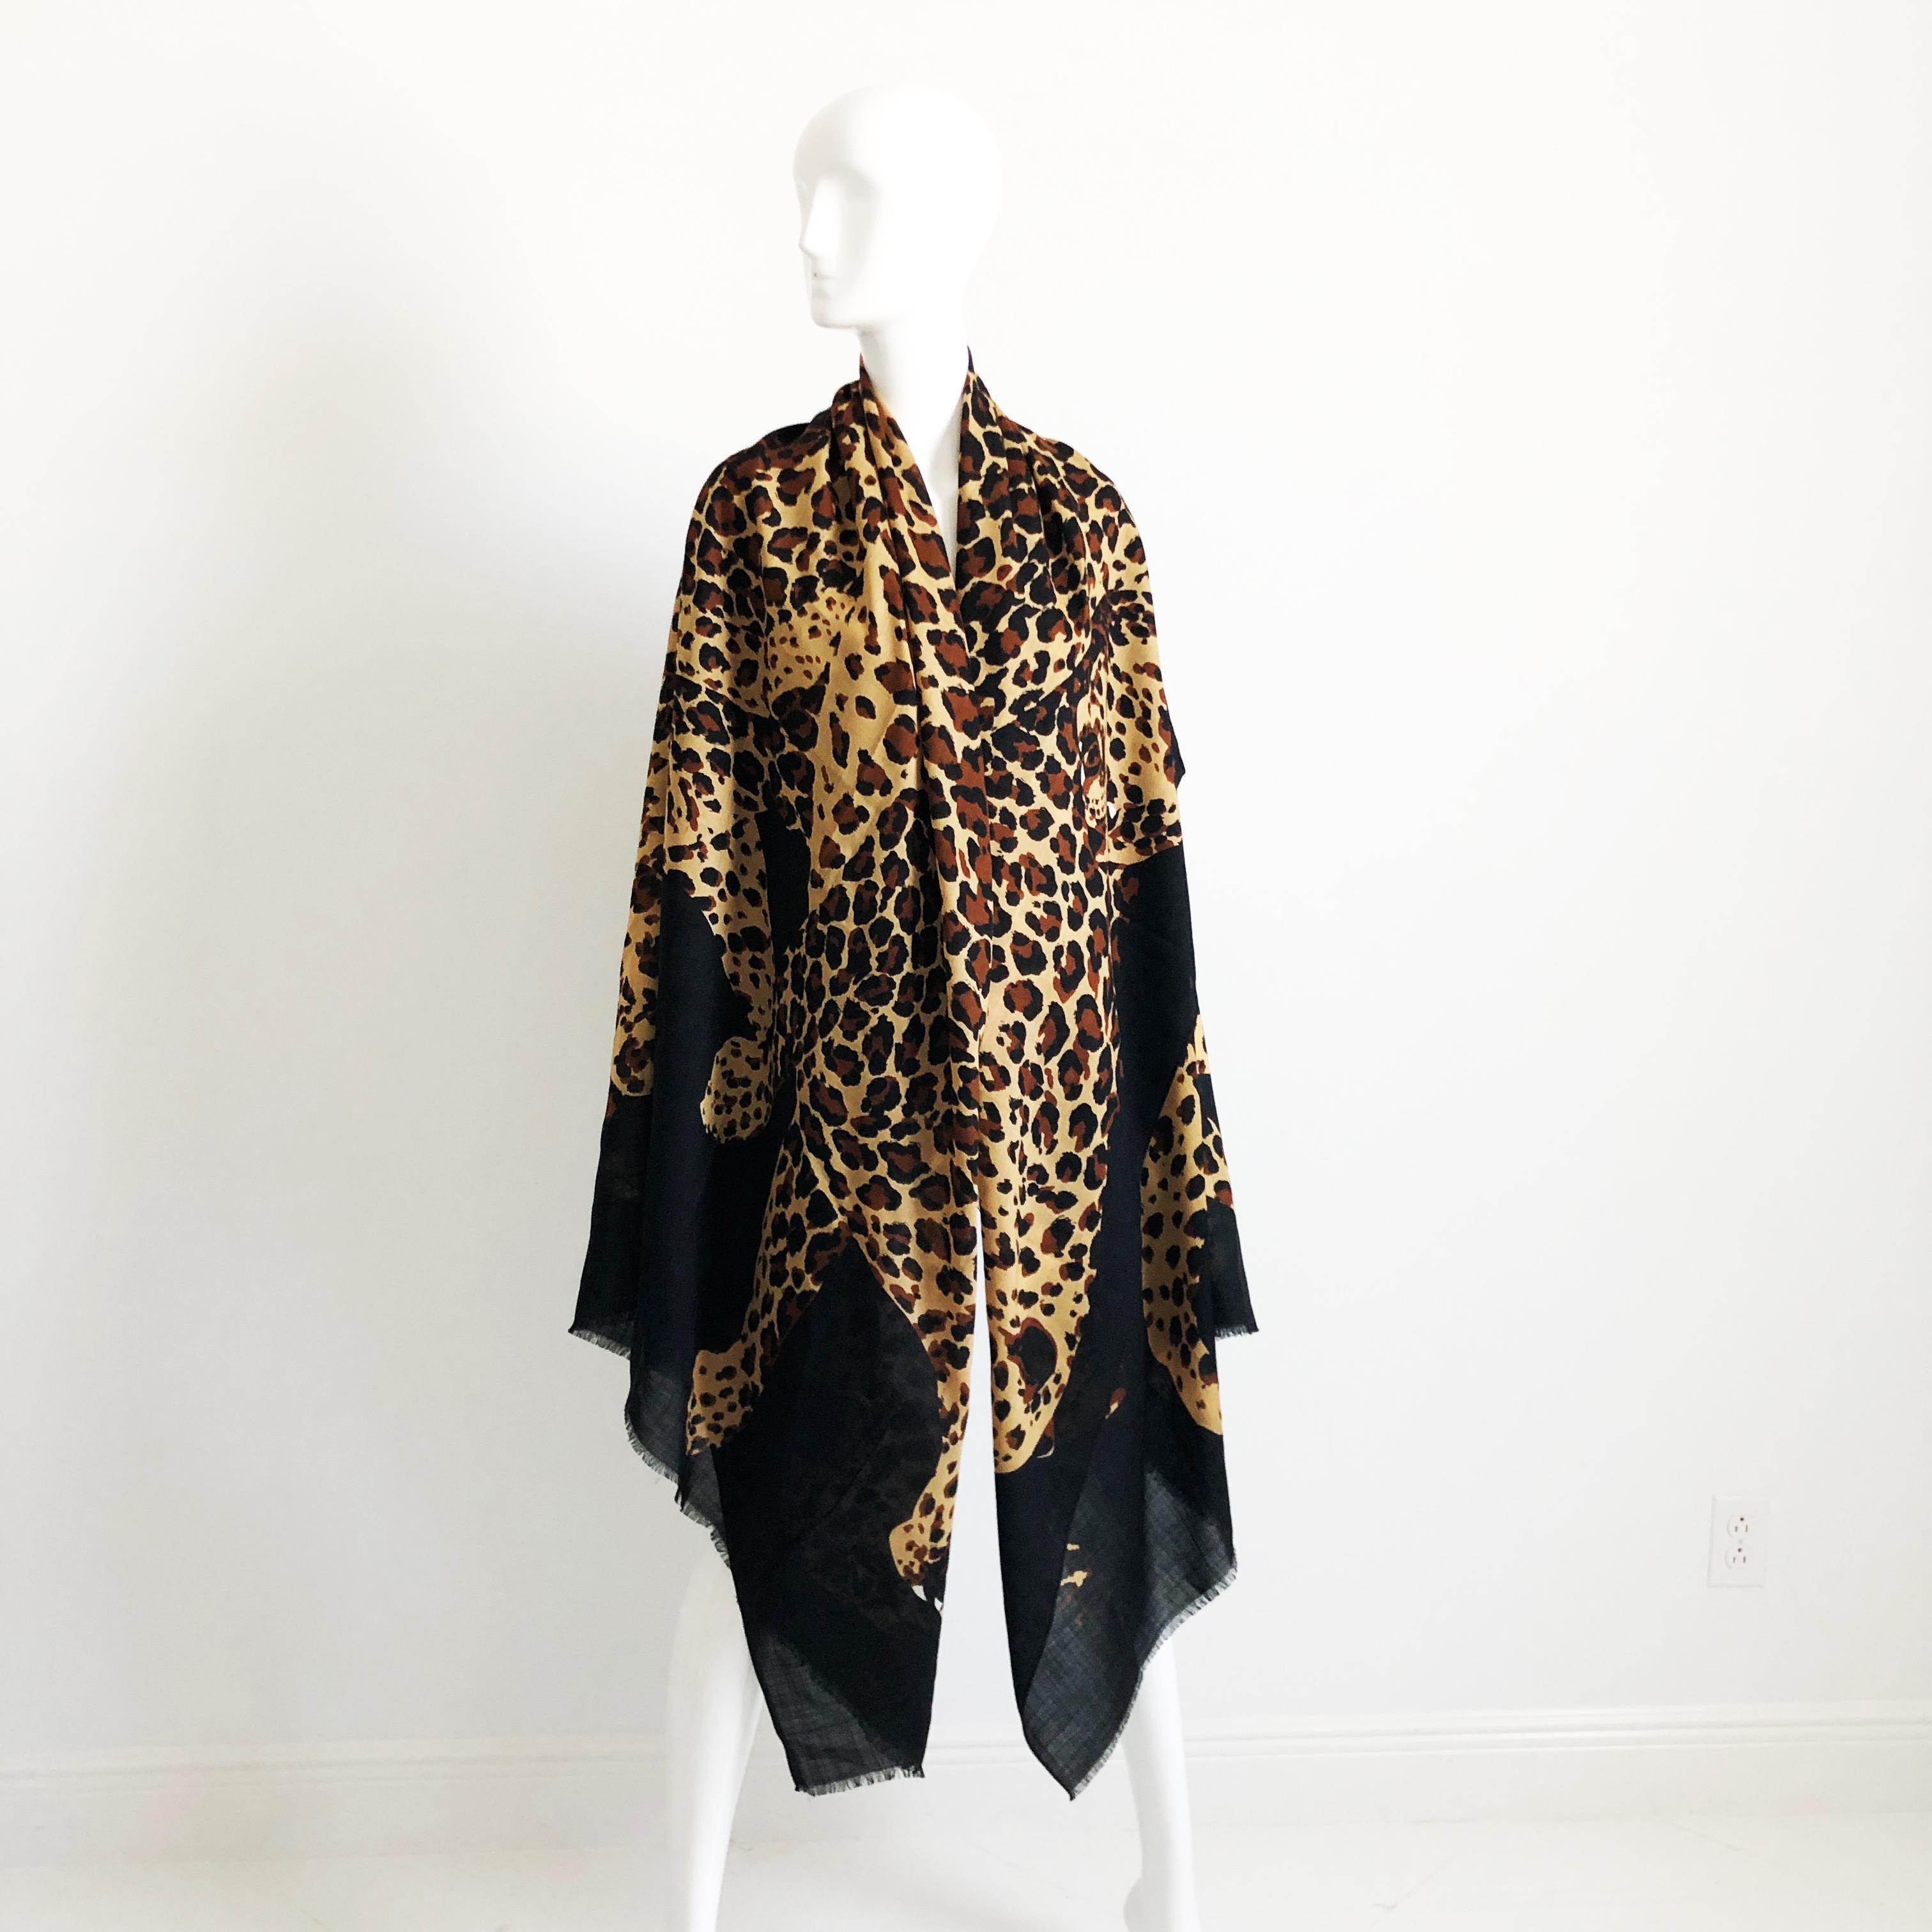 Yves Saint Laurent Shawl Leopard Oversized Scarf Silk Wool Blend Vintage 84in In Good Condition For Sale In Port Saint Lucie, FL